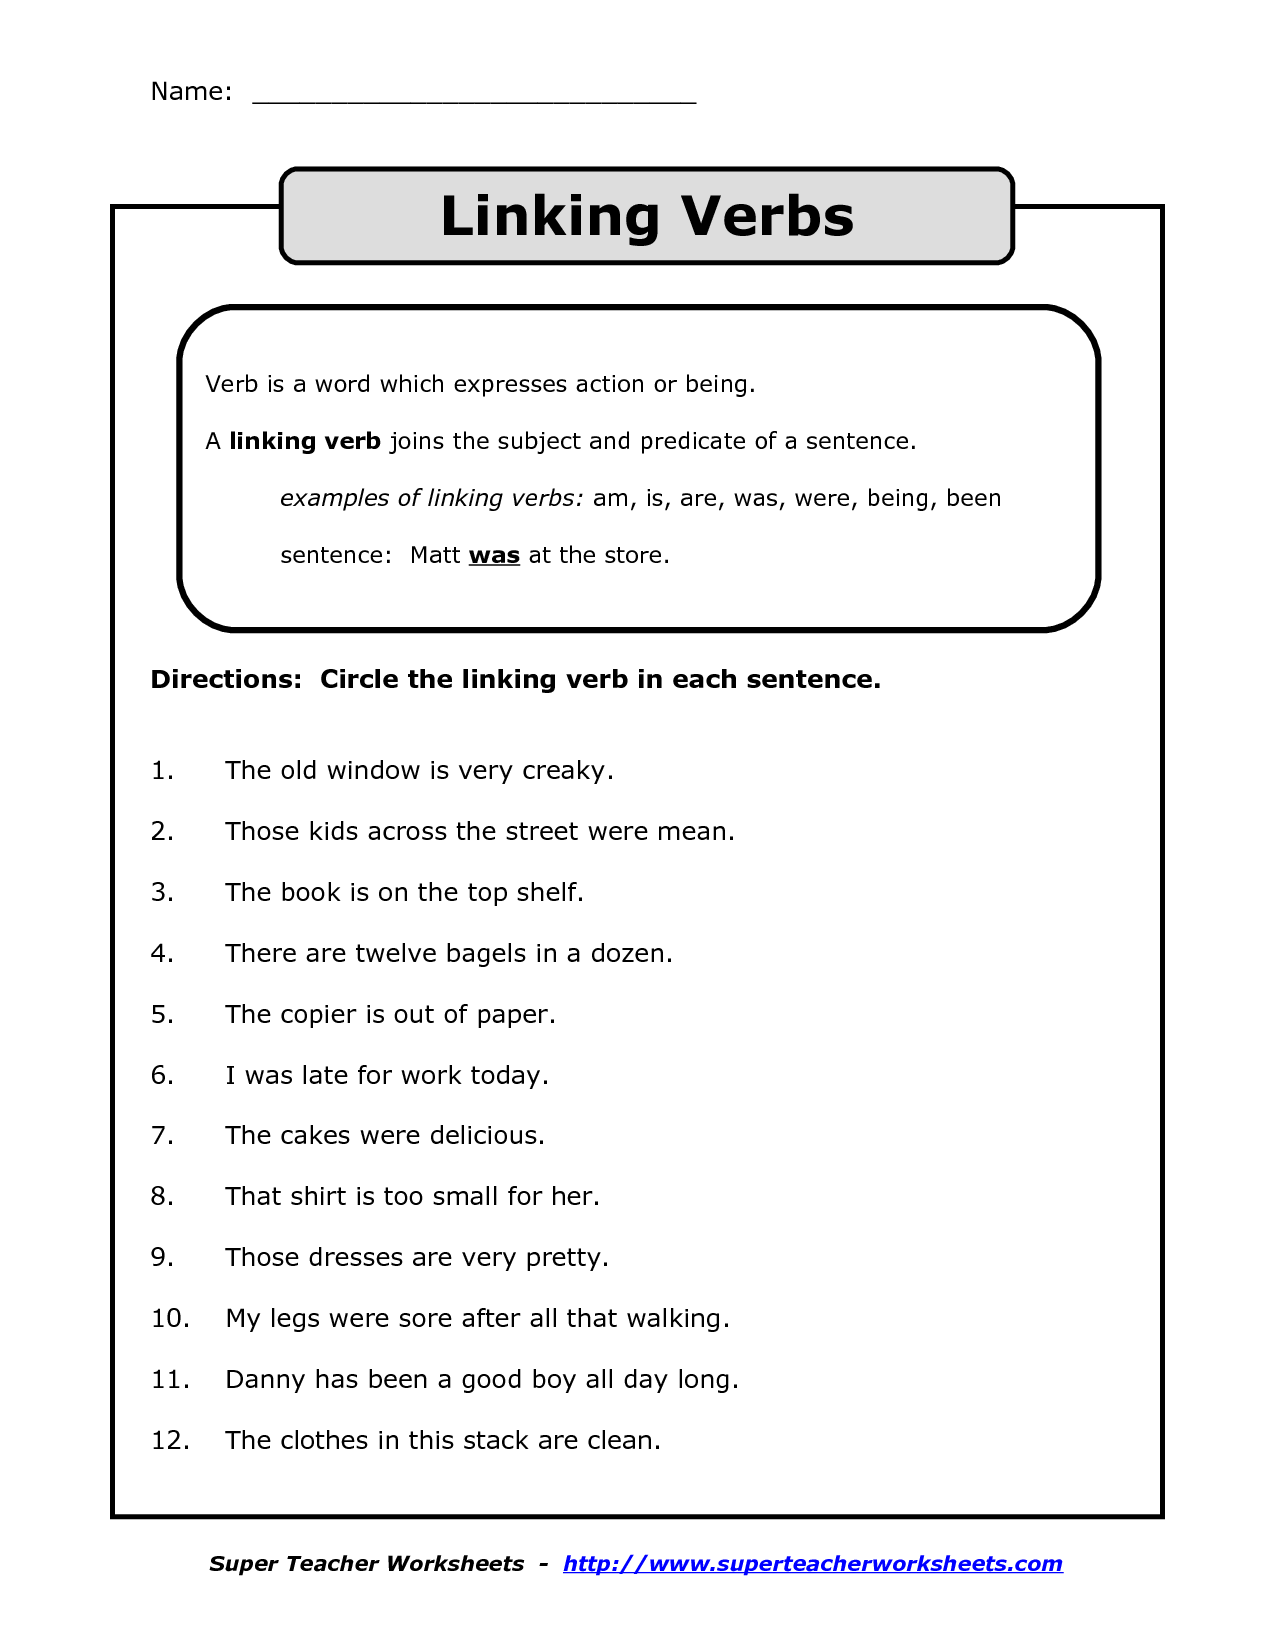 linking-verbs-worksheets-5th-grade-in-2020-linking-verbs-helping-verbs-worksheet-verb-worksheets